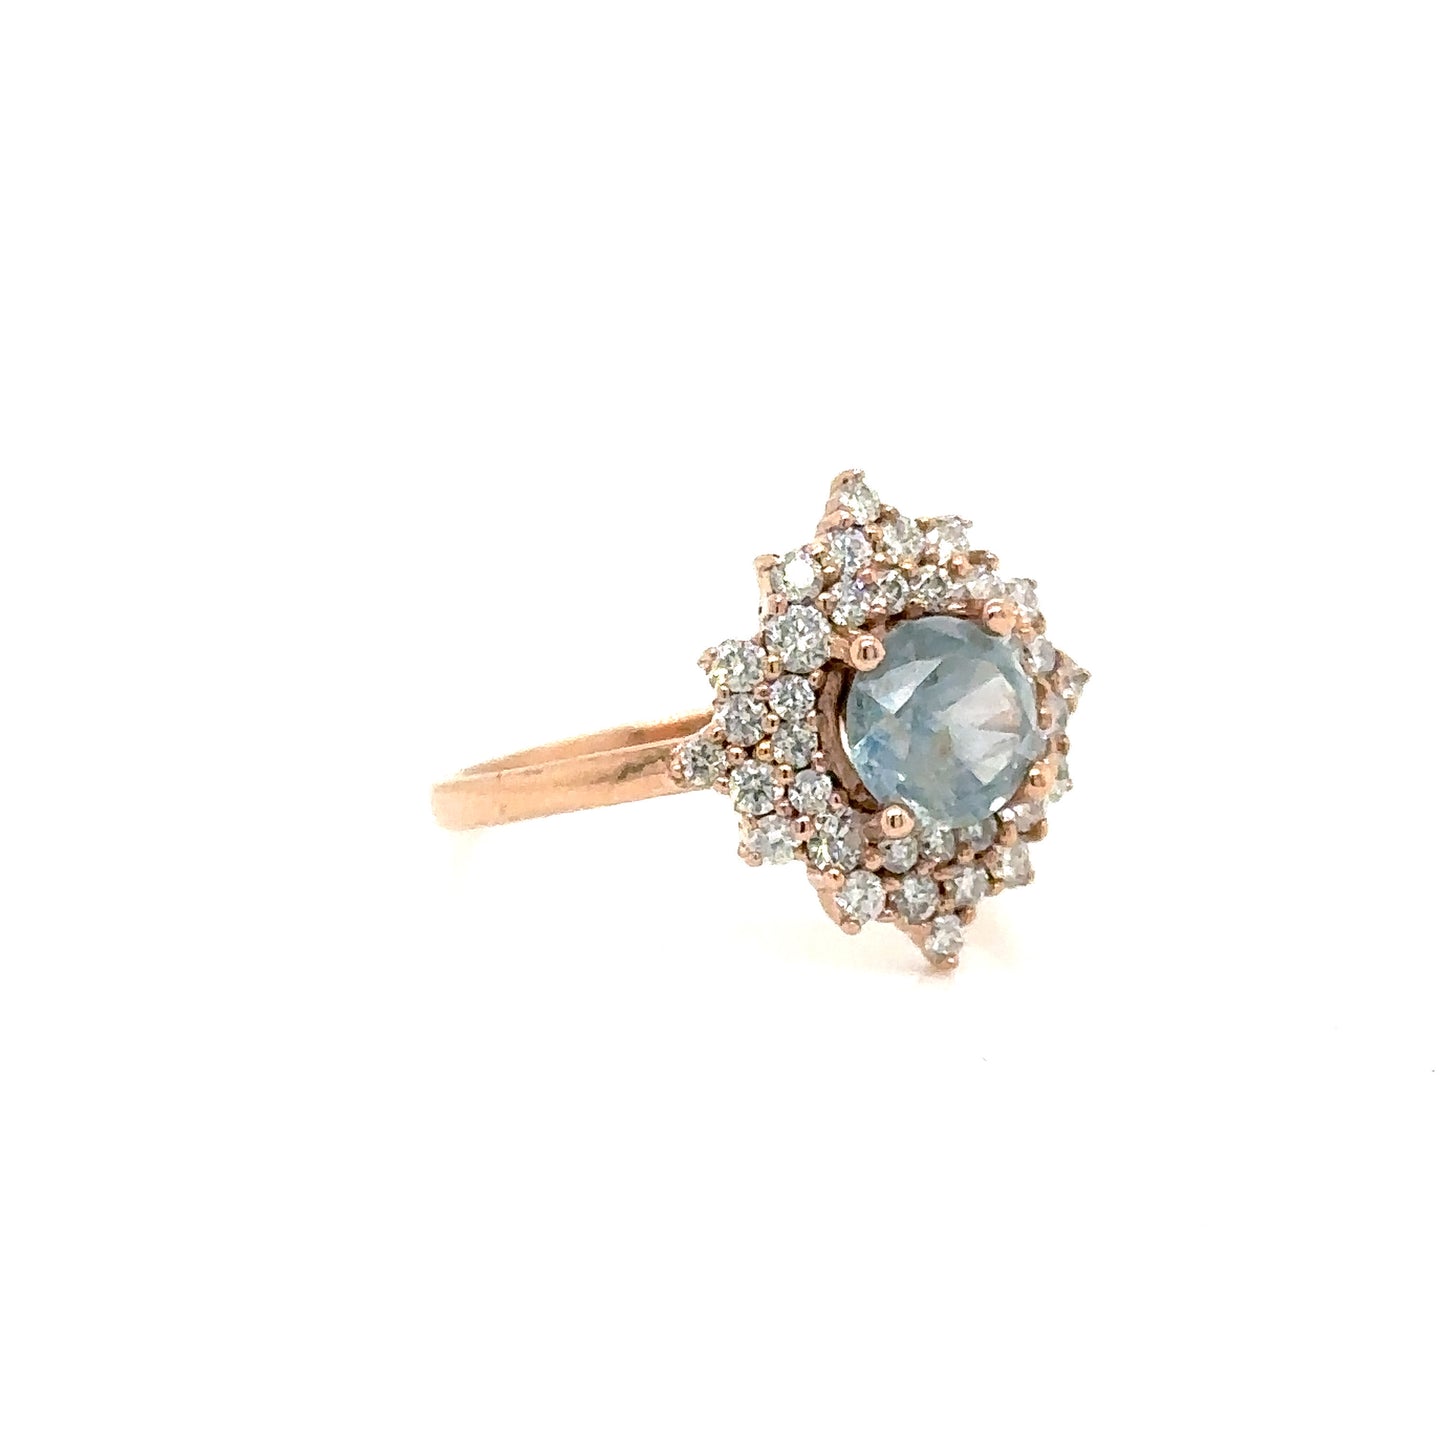 Opalescent 'Icy' Sapphire Ring with Diamonds